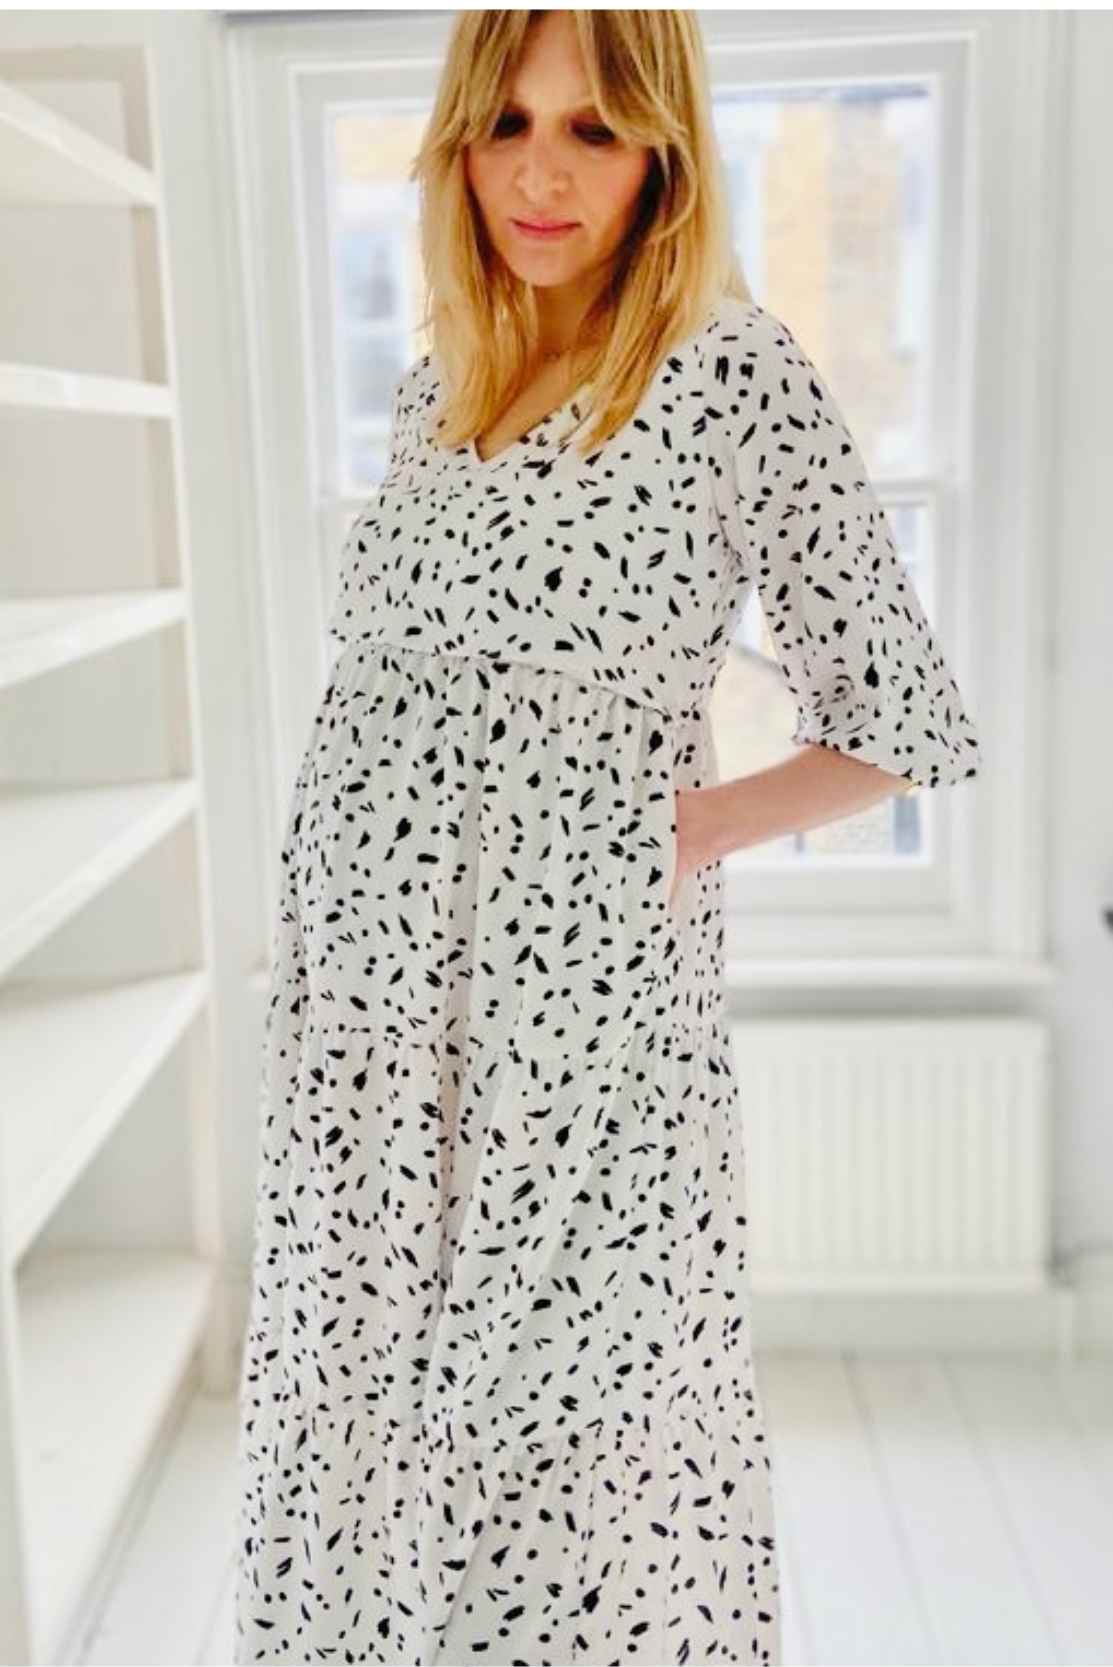 This bump- and breastfeeding-friendly dress has a boho fit, with billowy sleeves and a flattering V-neckline. For pregnancy, the tiered design makes this a stylish maternity dress choice that is also so comfortable until full-term. Postpartum, the concealed zippers allow for convenient nursing.